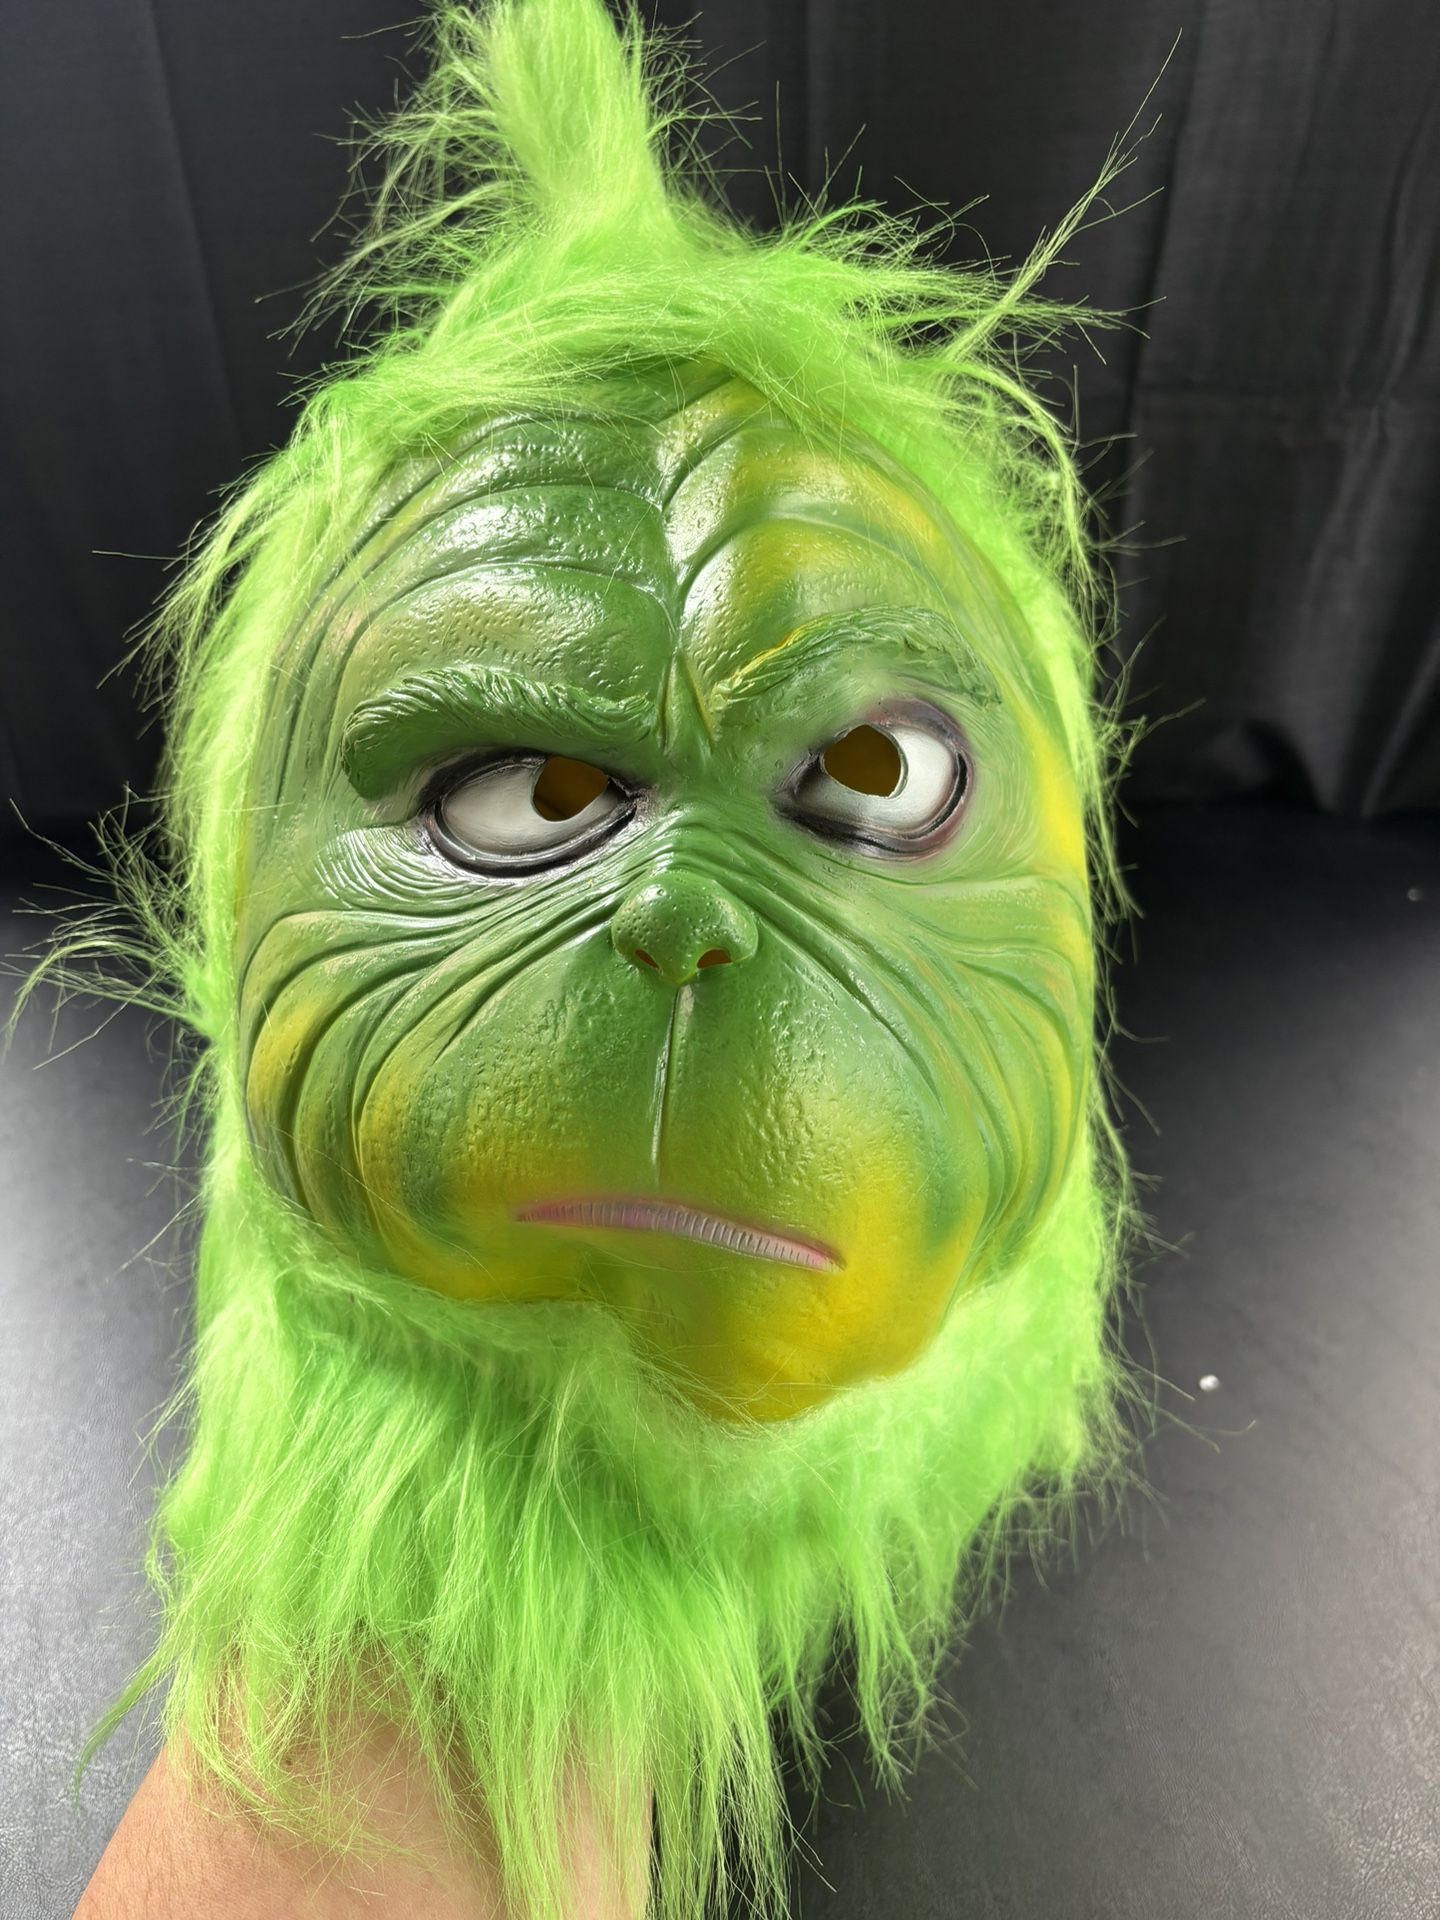 The Grinch Mask Costume with Green Furry Fur for Christmas Cosplay Party